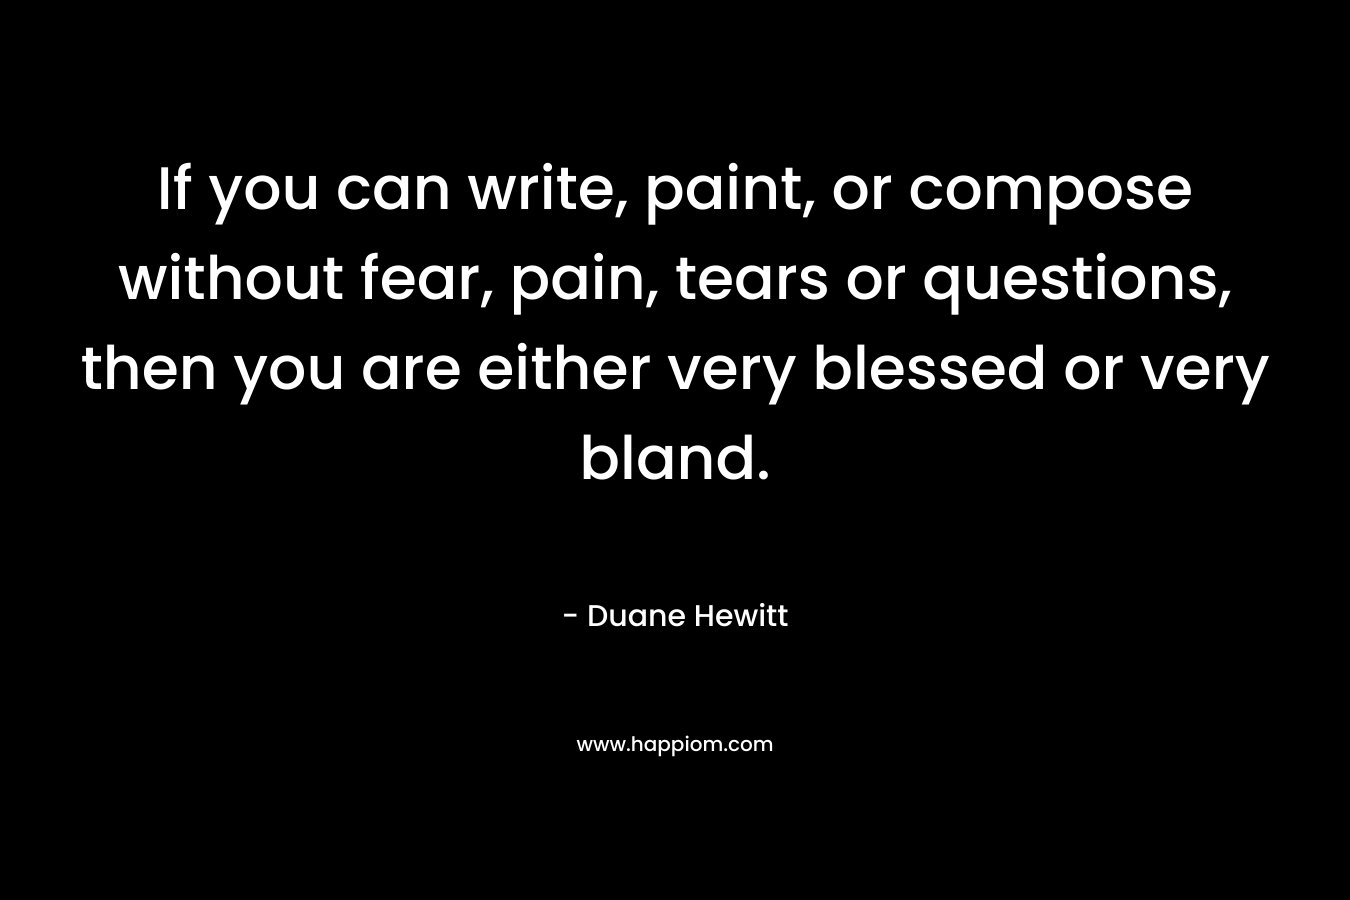 If you can write, paint, or compose without fear, pain, tears or questions, then you are either very blessed or very bland. – Duane Hewitt